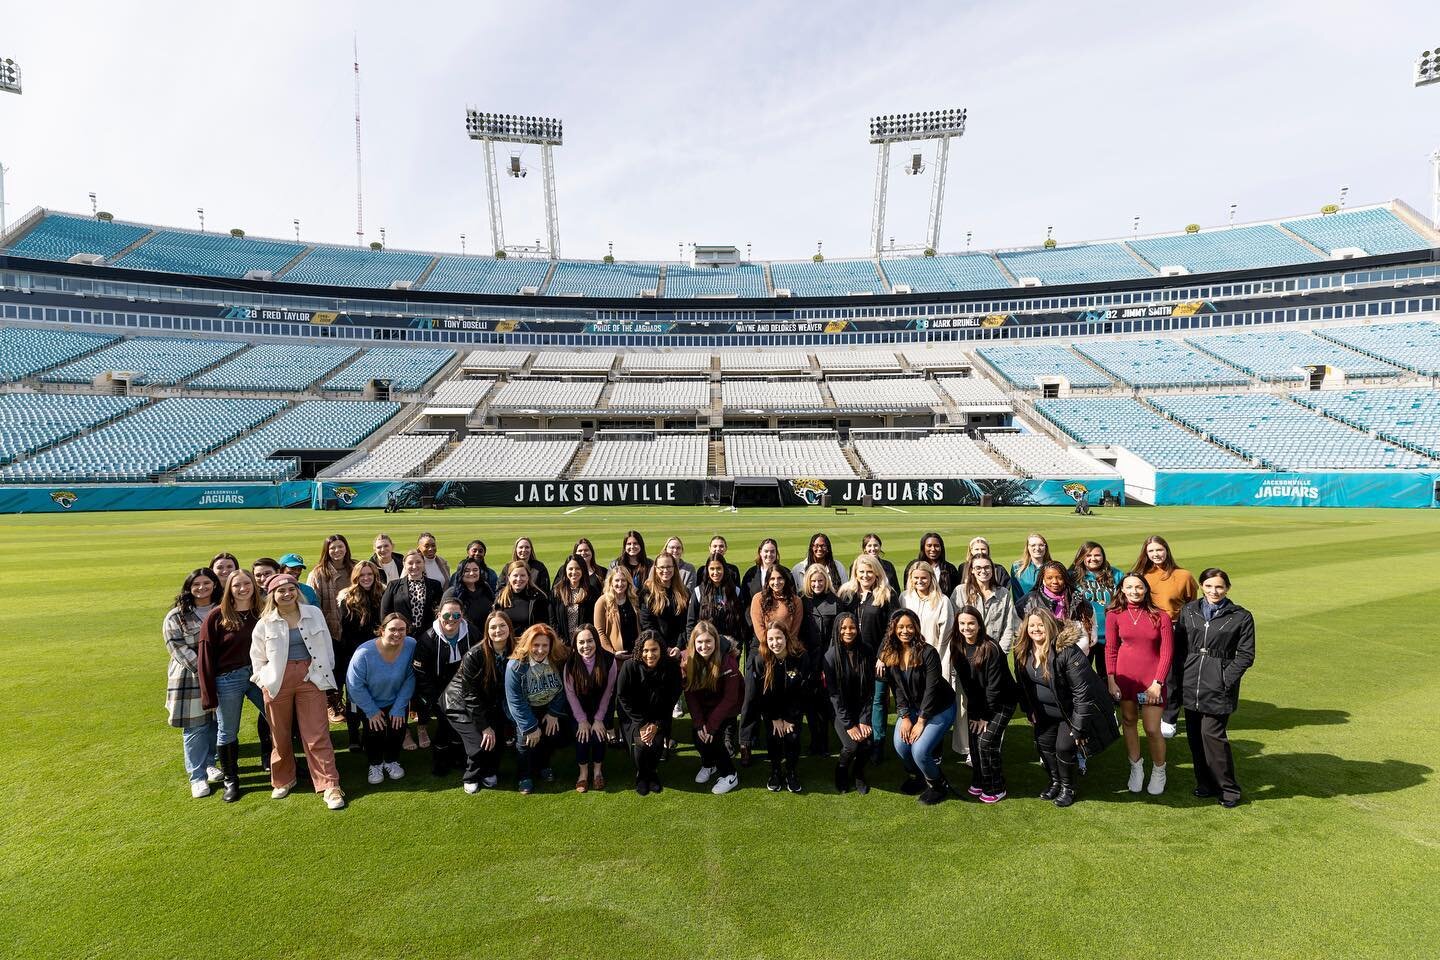 Happy National Girls &amp; Women in Sports Day to all of the incredible women who make every experience at EverBank Stadium one to remember! We are so thankful for you all 🤍🐆 #NGWSD